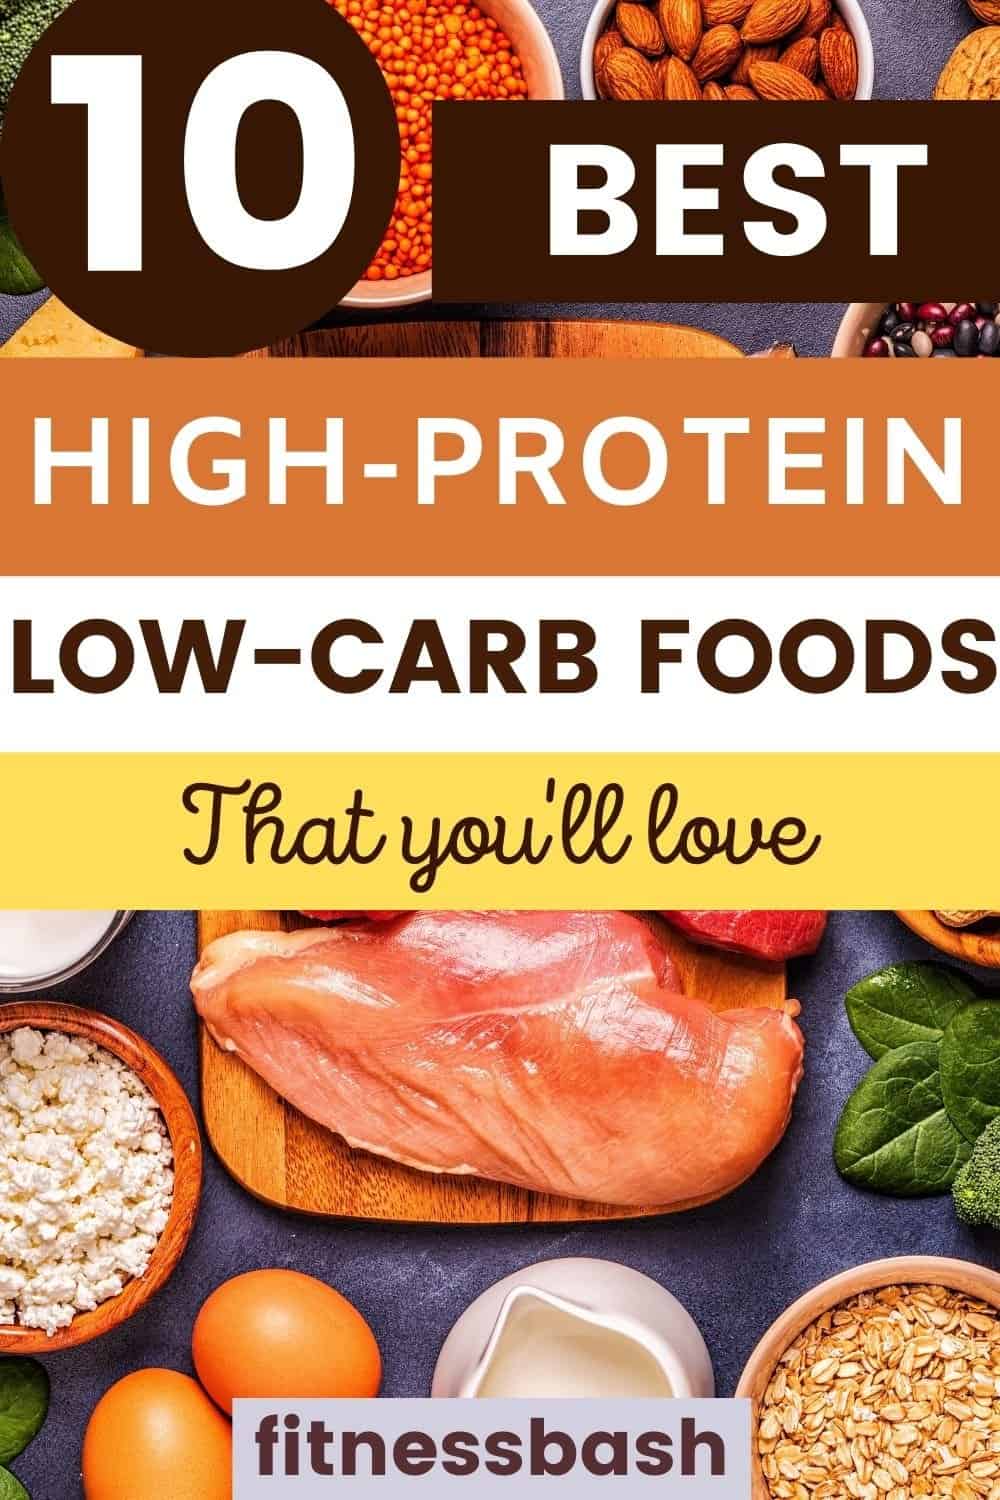 high-protein low-carb foods 